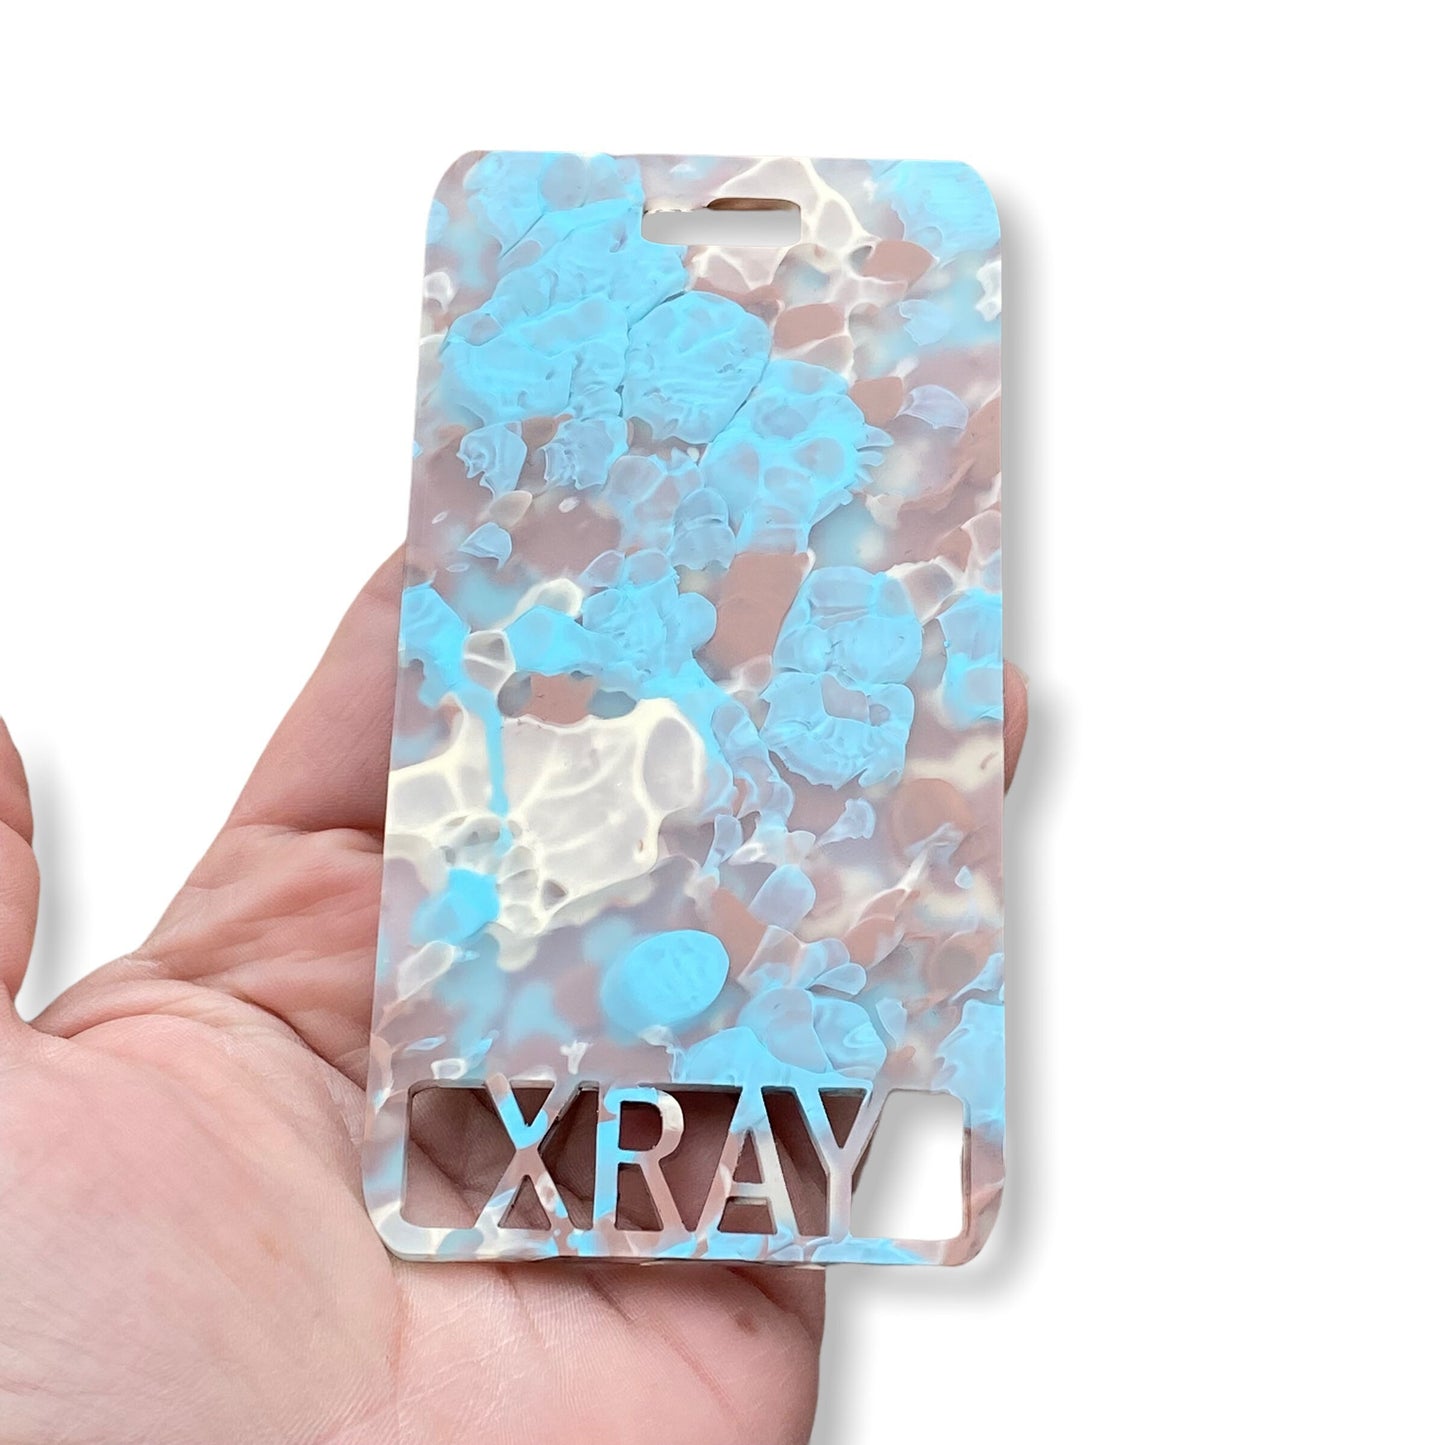 Rad Pad Marbled Mixed Paint for Holding Xray Markers